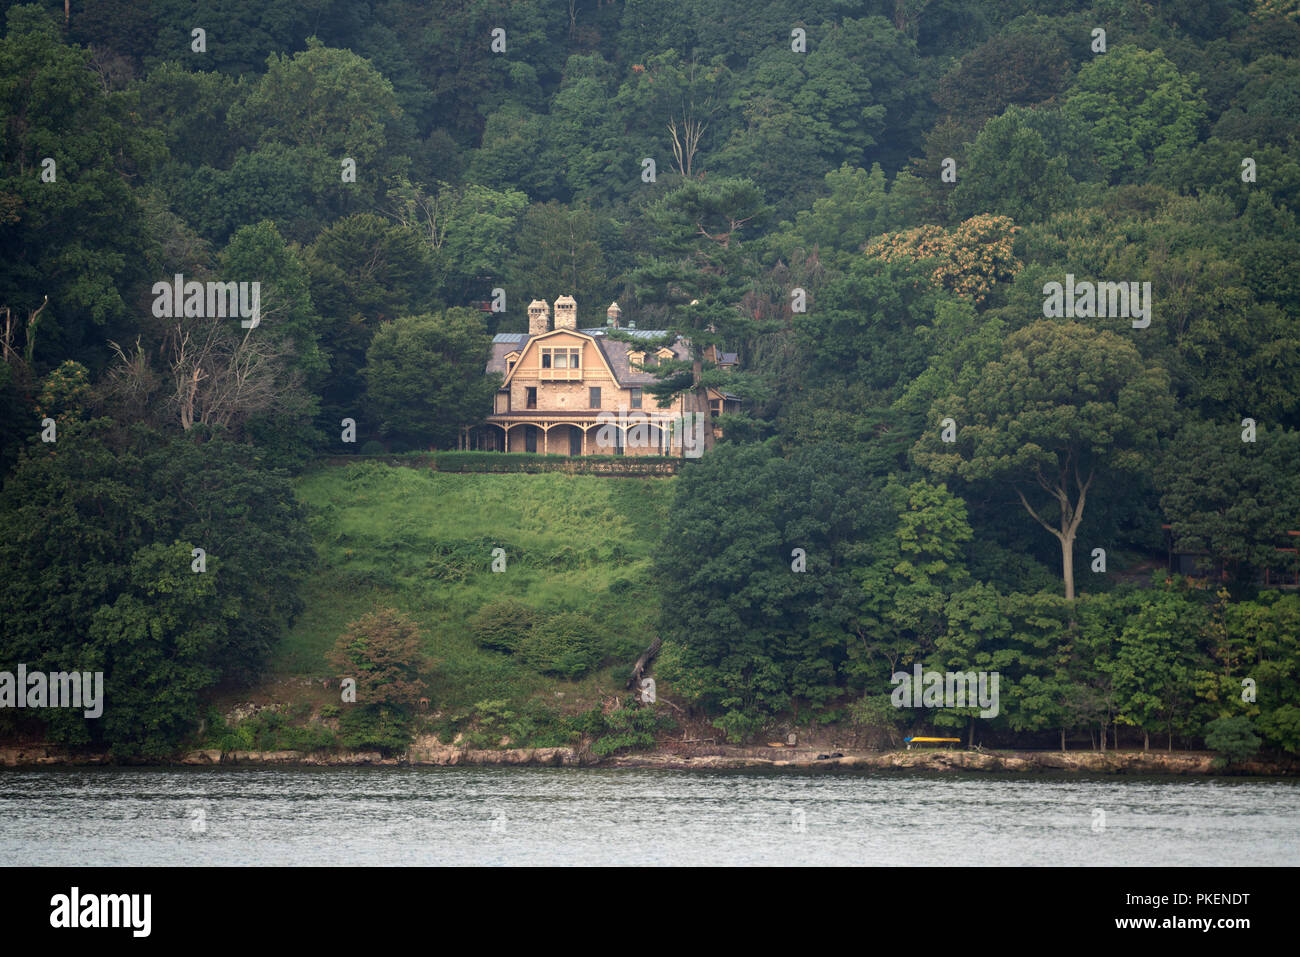 Cliffside, Lydia G. Lawrence's estate in Palisades, Rockland County, N.Y., was built in 1876. It is on the National Register of Historic Places. Stock Photo